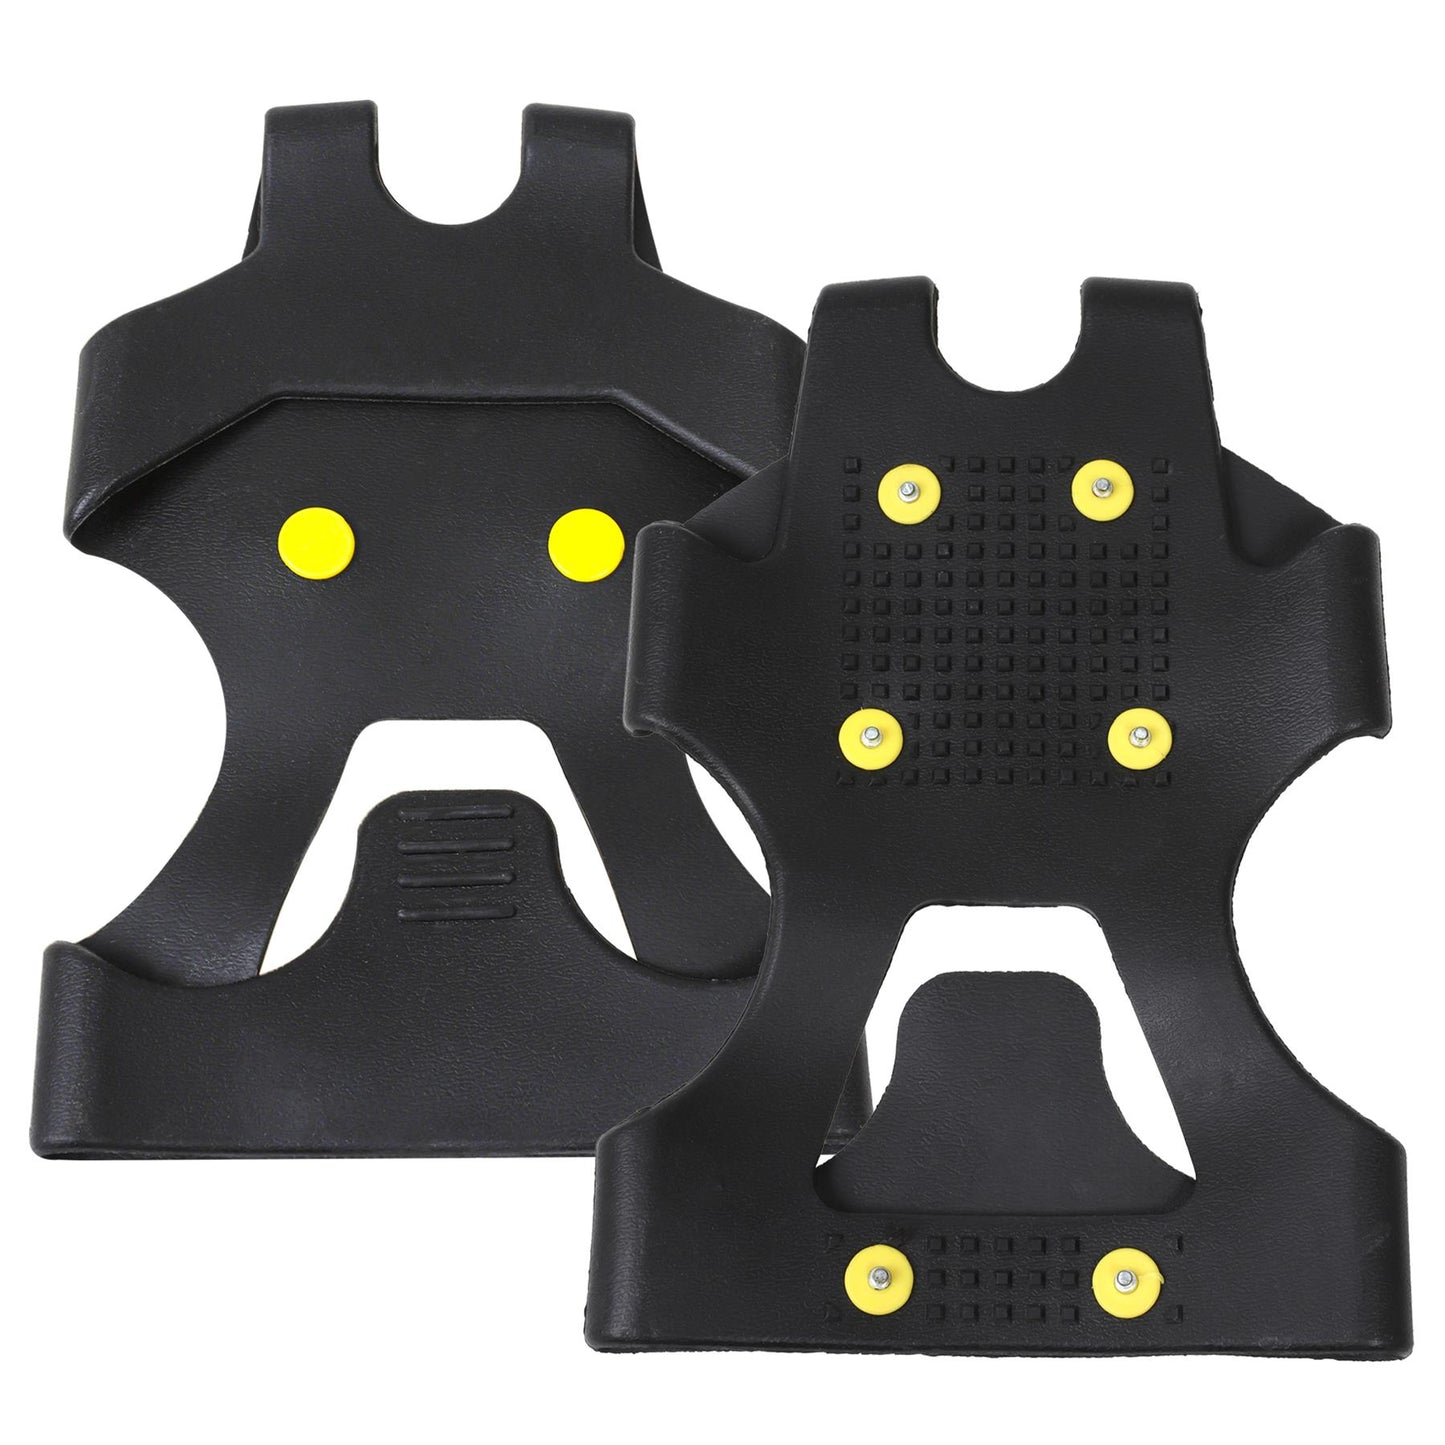 Stay Safe and Stable on Slippery Surfaces with Ice Grippers